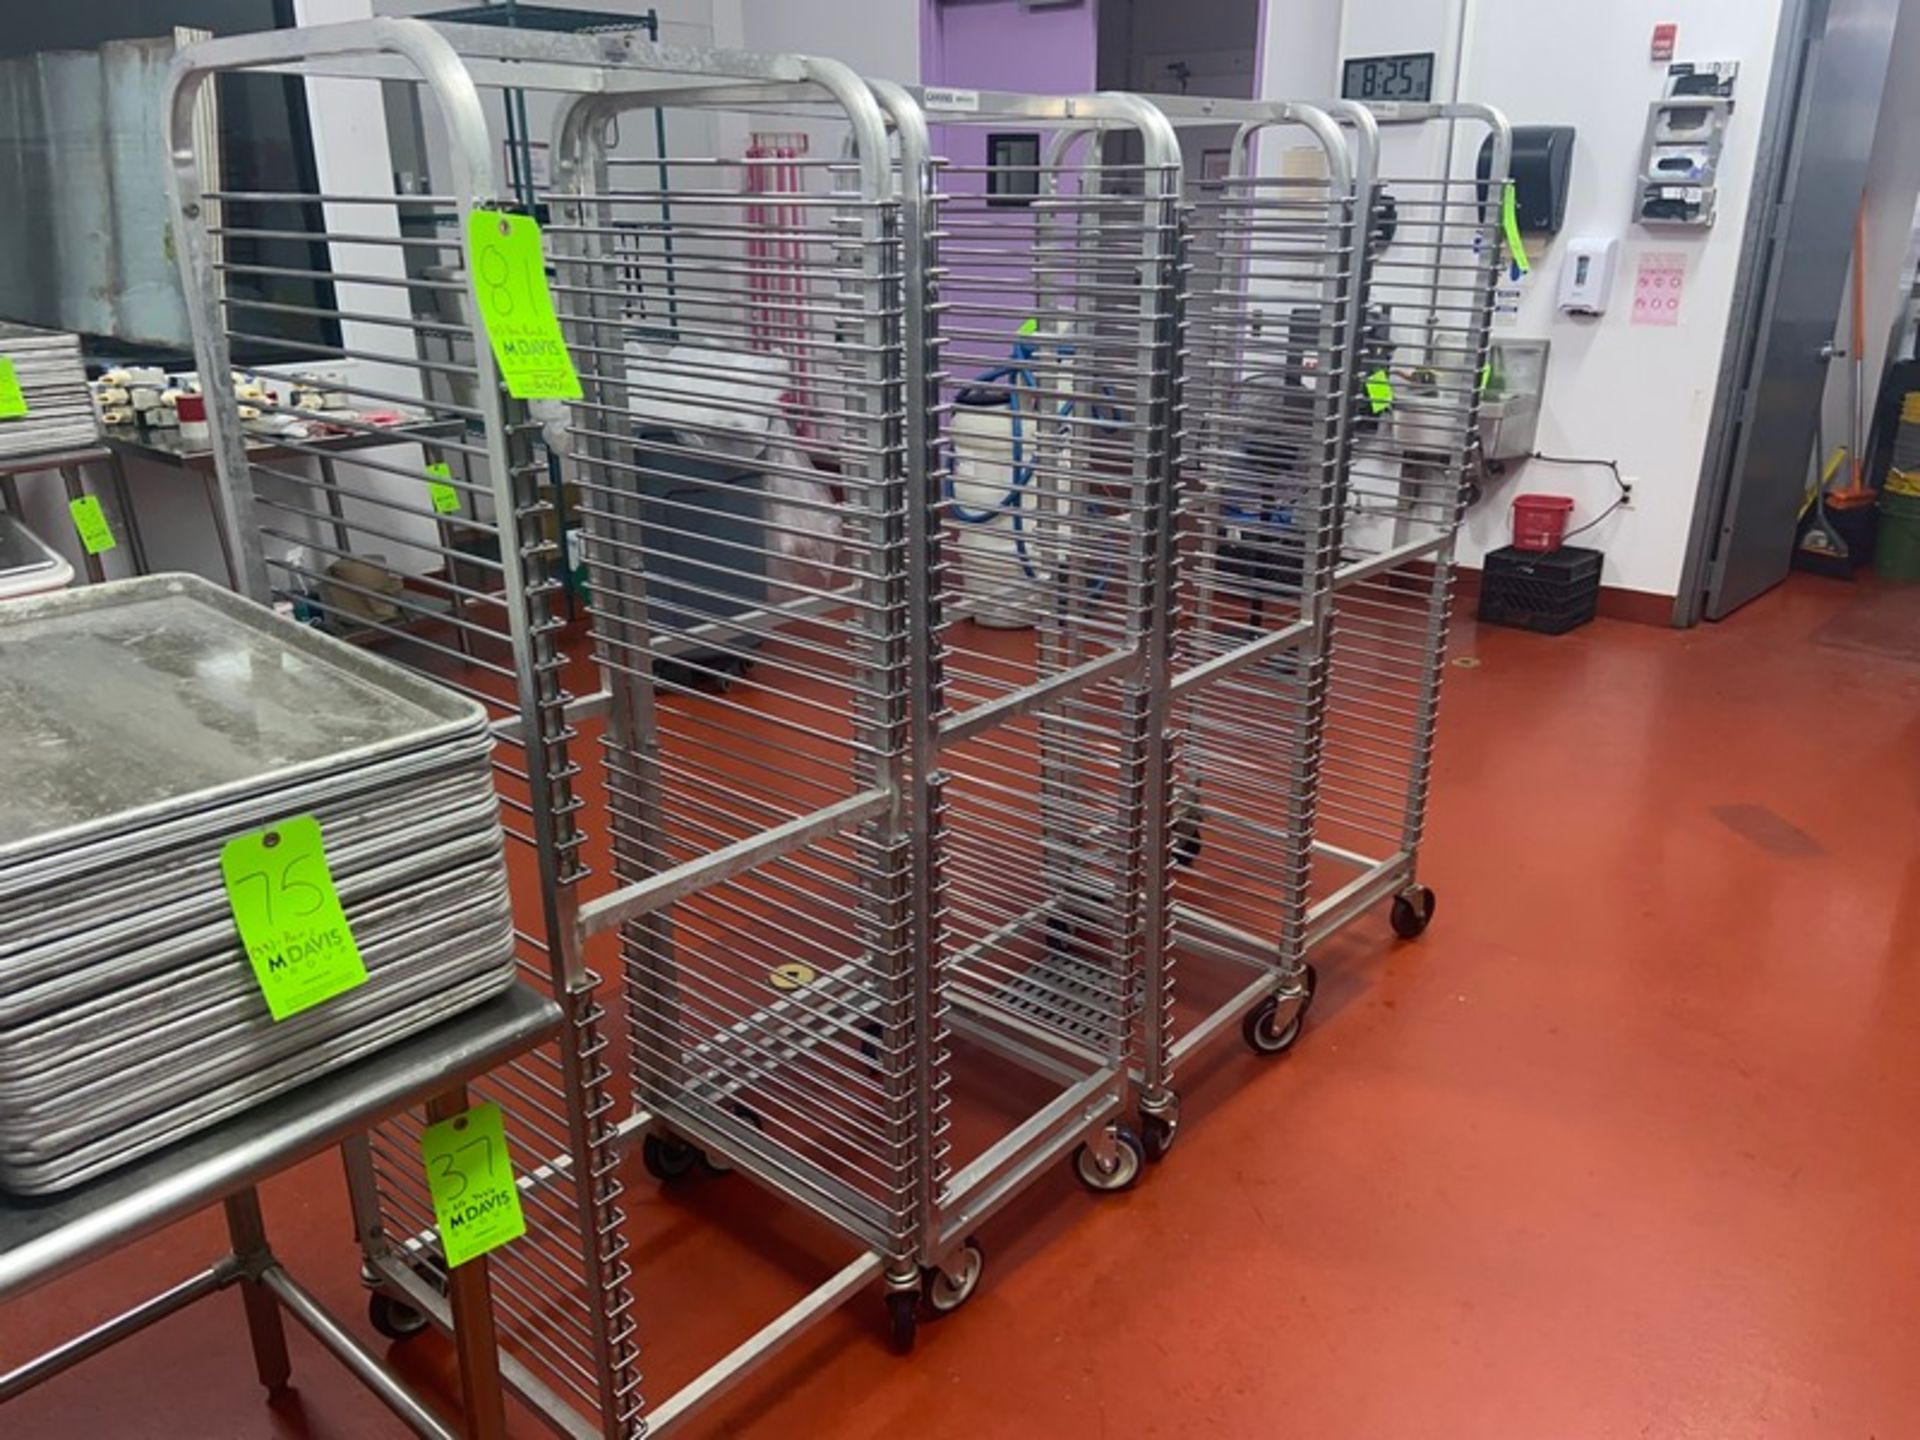 (4) Channel Baking Pan Racks, with (36) Pan Slots, Overall Dims.: Aprox. 25" L x 20-1/2" W x 70" - Image 2 of 3